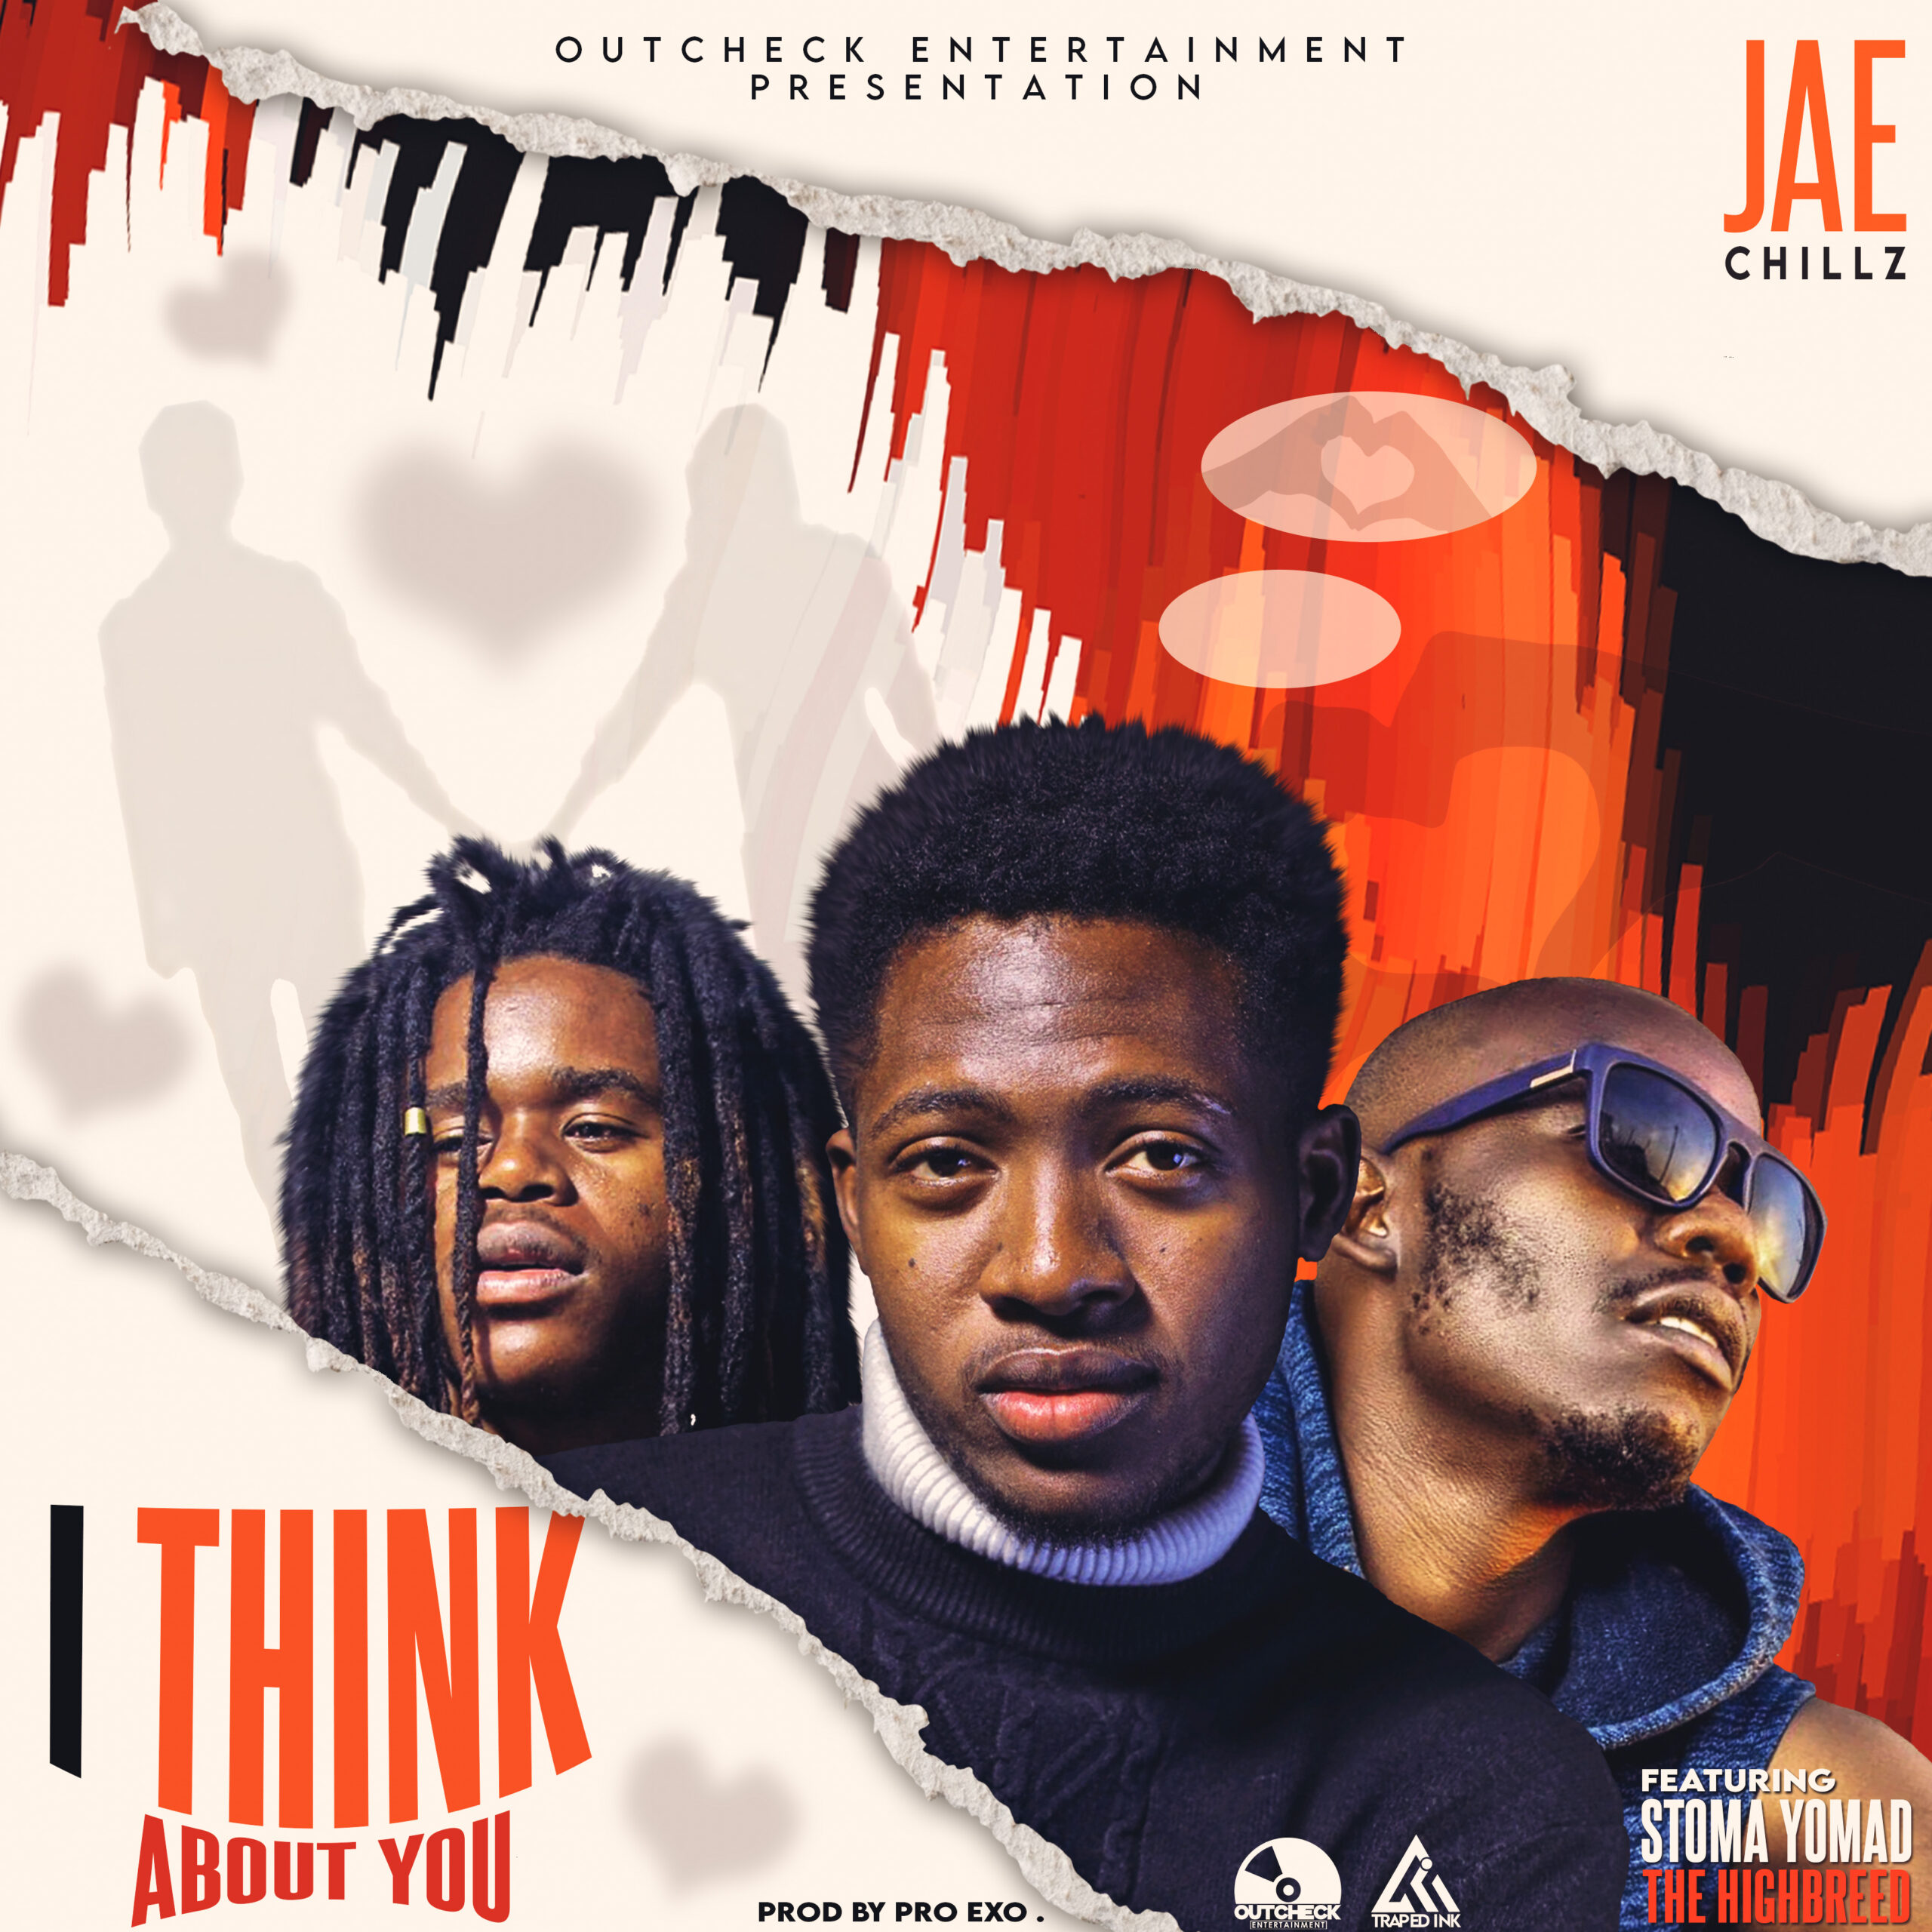 Jae Chillz ft The High Breed x Stoma Yomad - I Think About You (Prod. by Pro Exo)